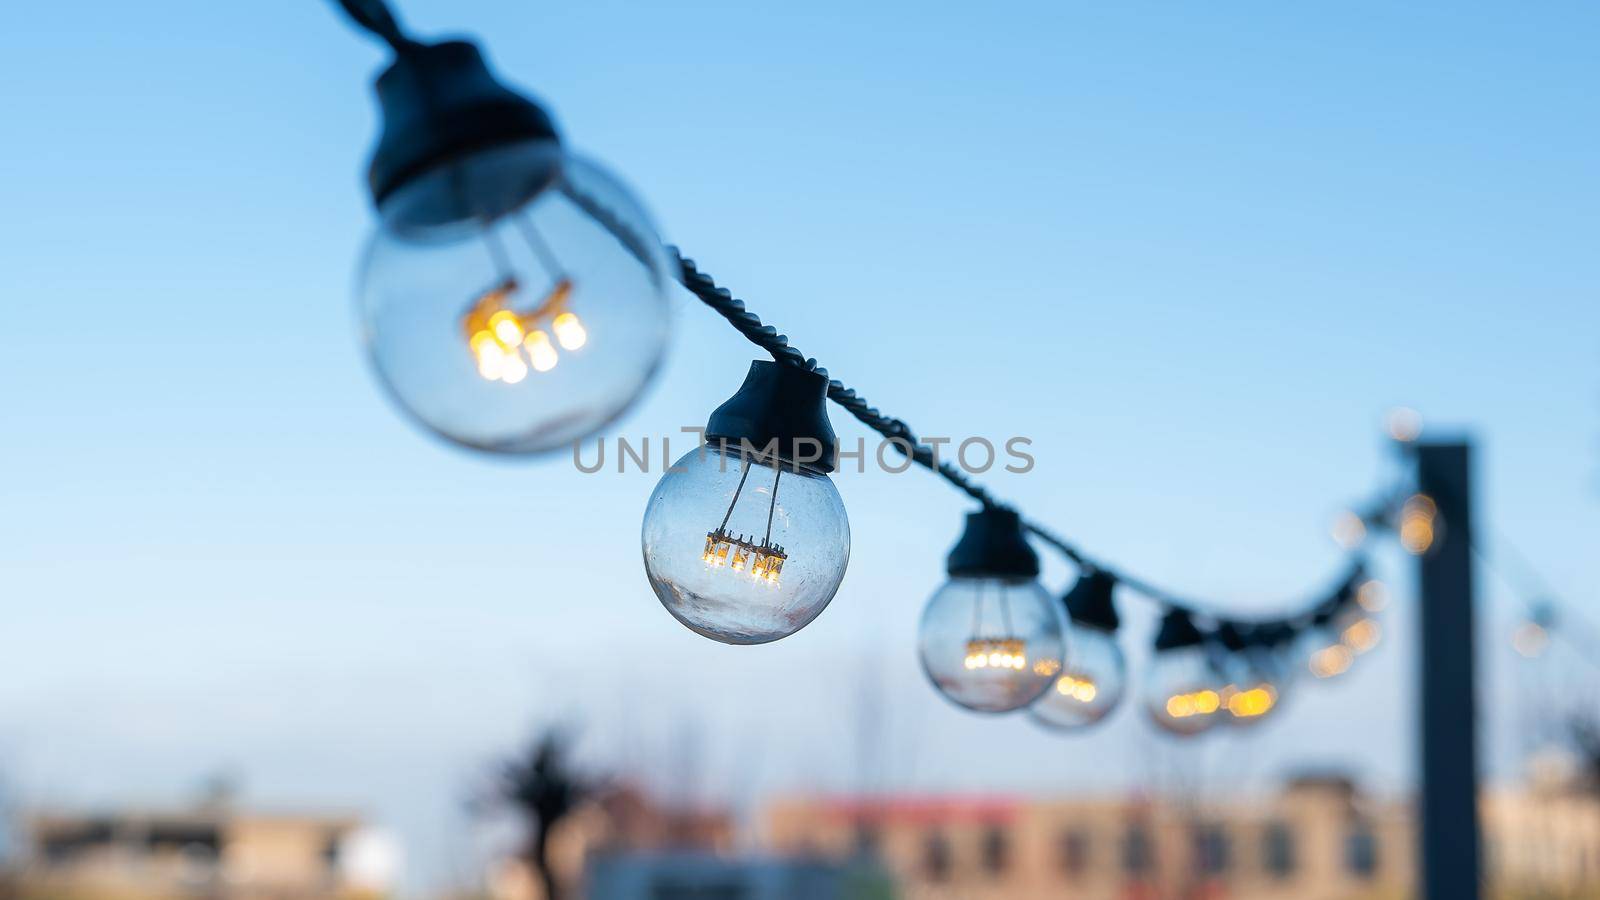 Garland of light bulbs in the park. by mrwed54